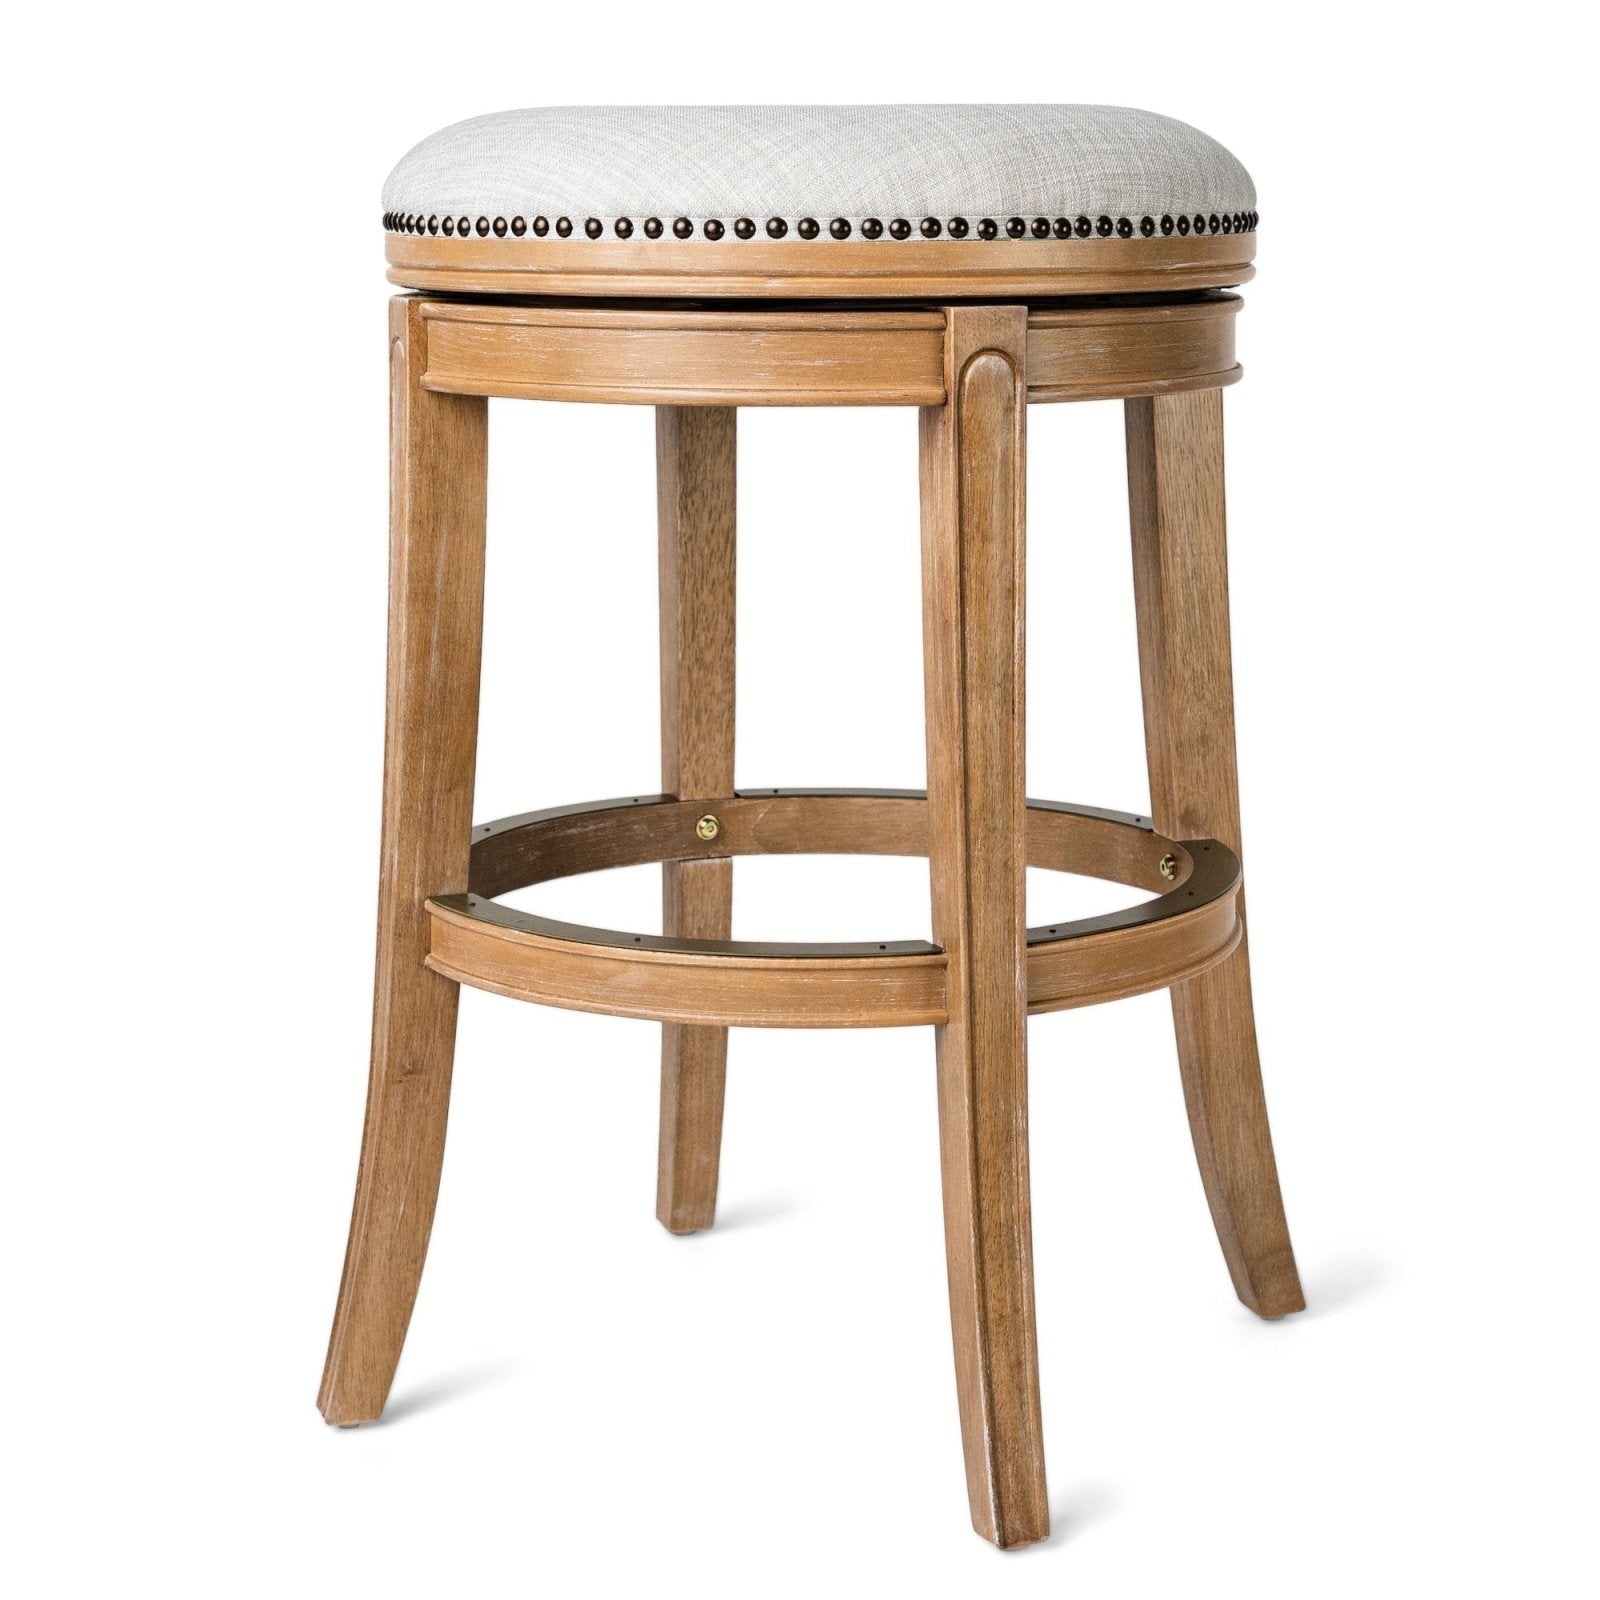 Alexander Backless Bar Stool in Weathered Oak Finish with Sand Color Fabric Upholstery in Stools by Maven Lane